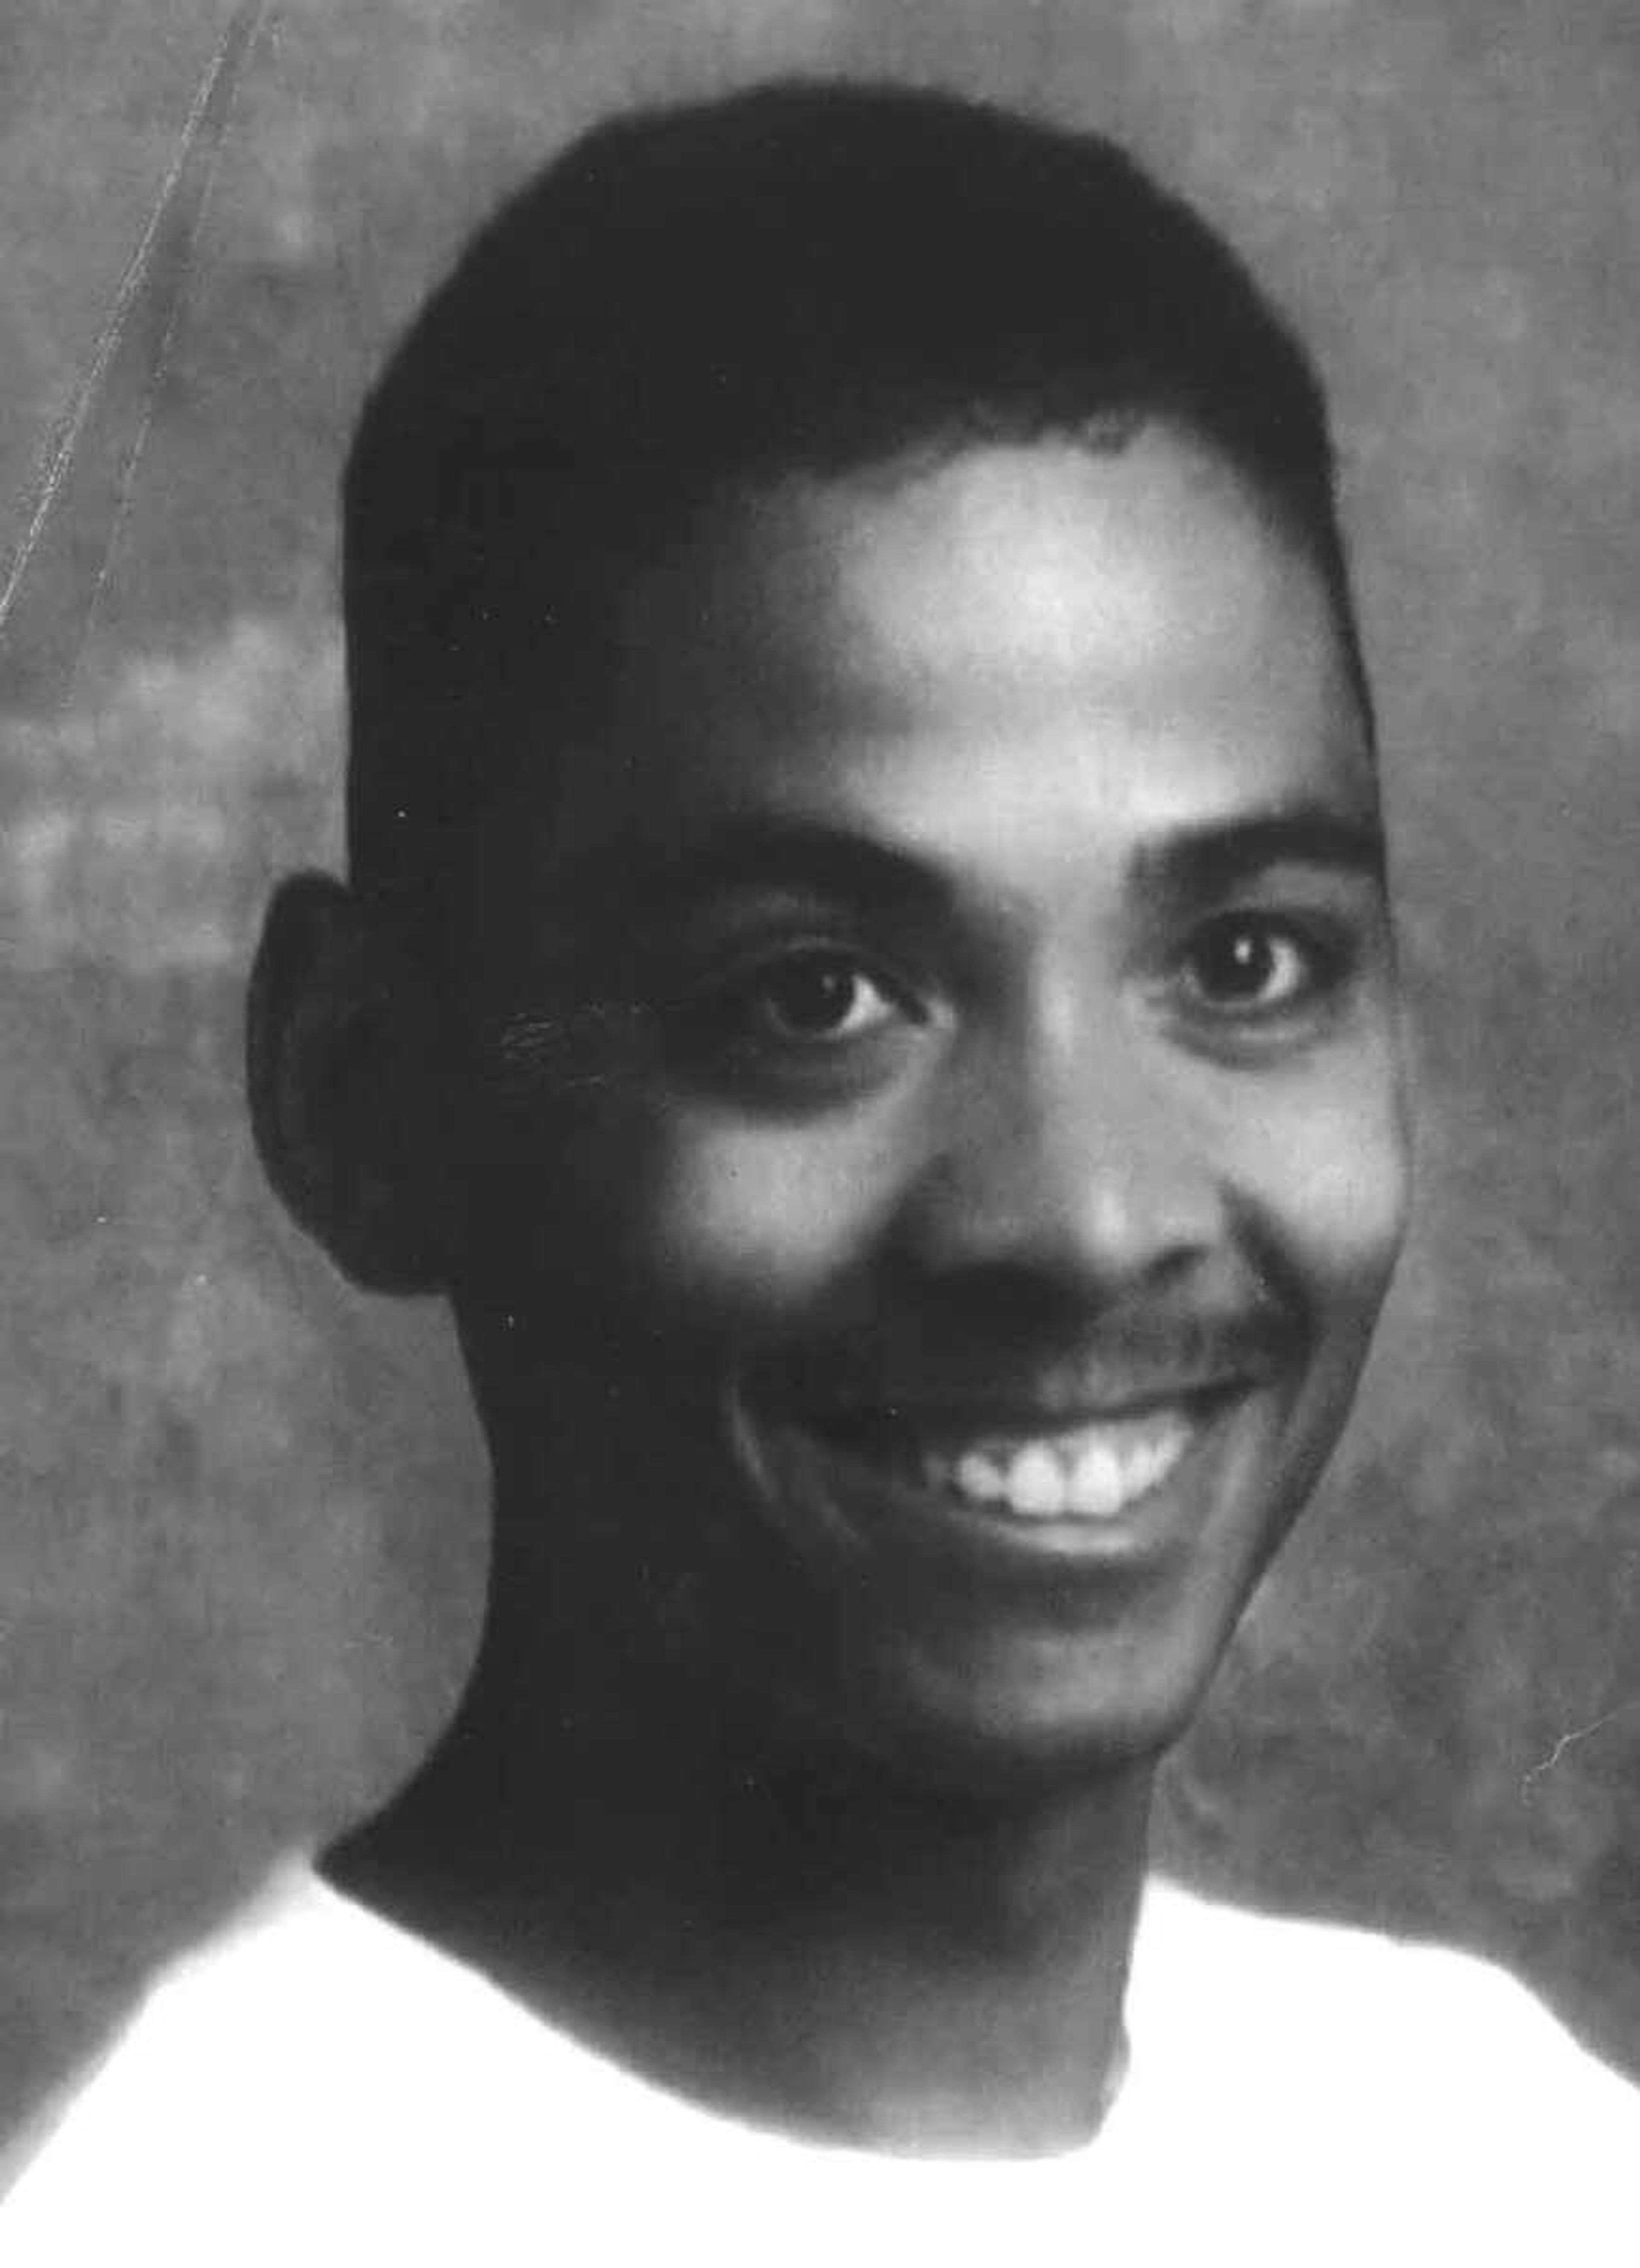 Michael Davis was a journalism major who died in 1994 as a result of hazing, which led the Mass Media department to begin the Michael Davis Lecture Series. - Submitted photo